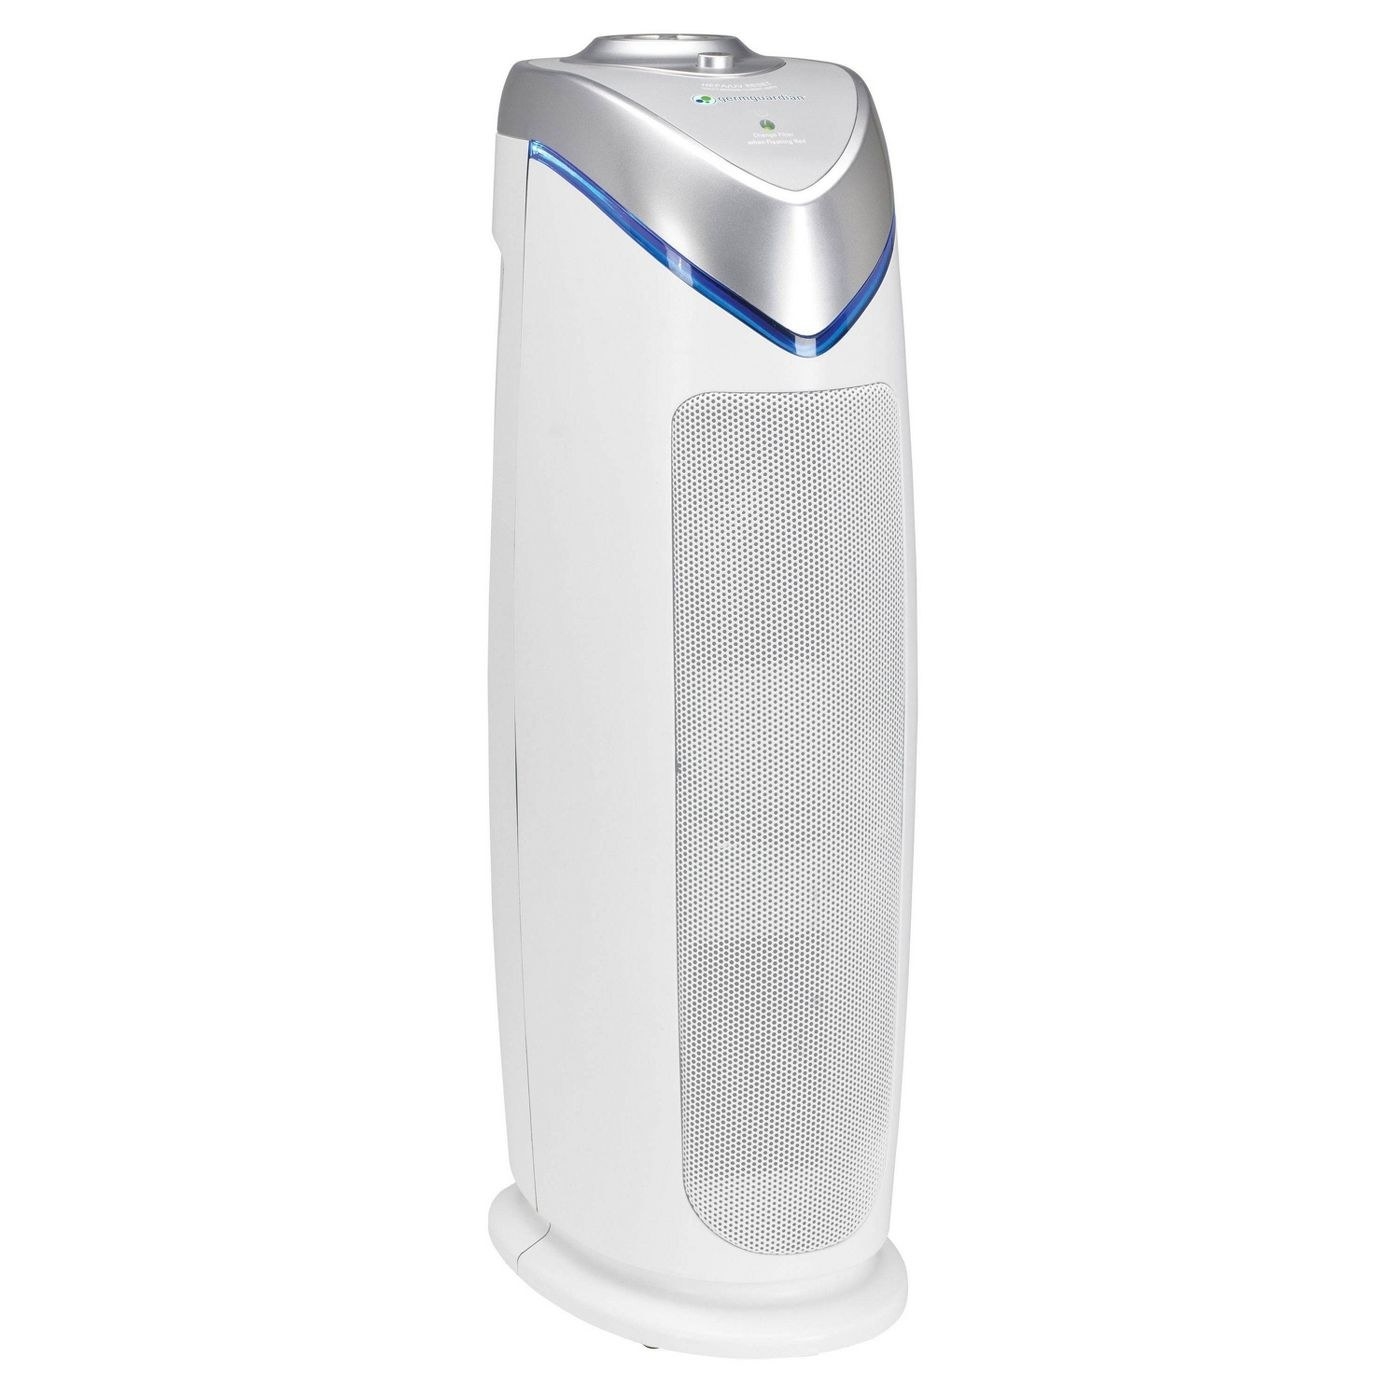 The white room air purifier with true HEPA filter